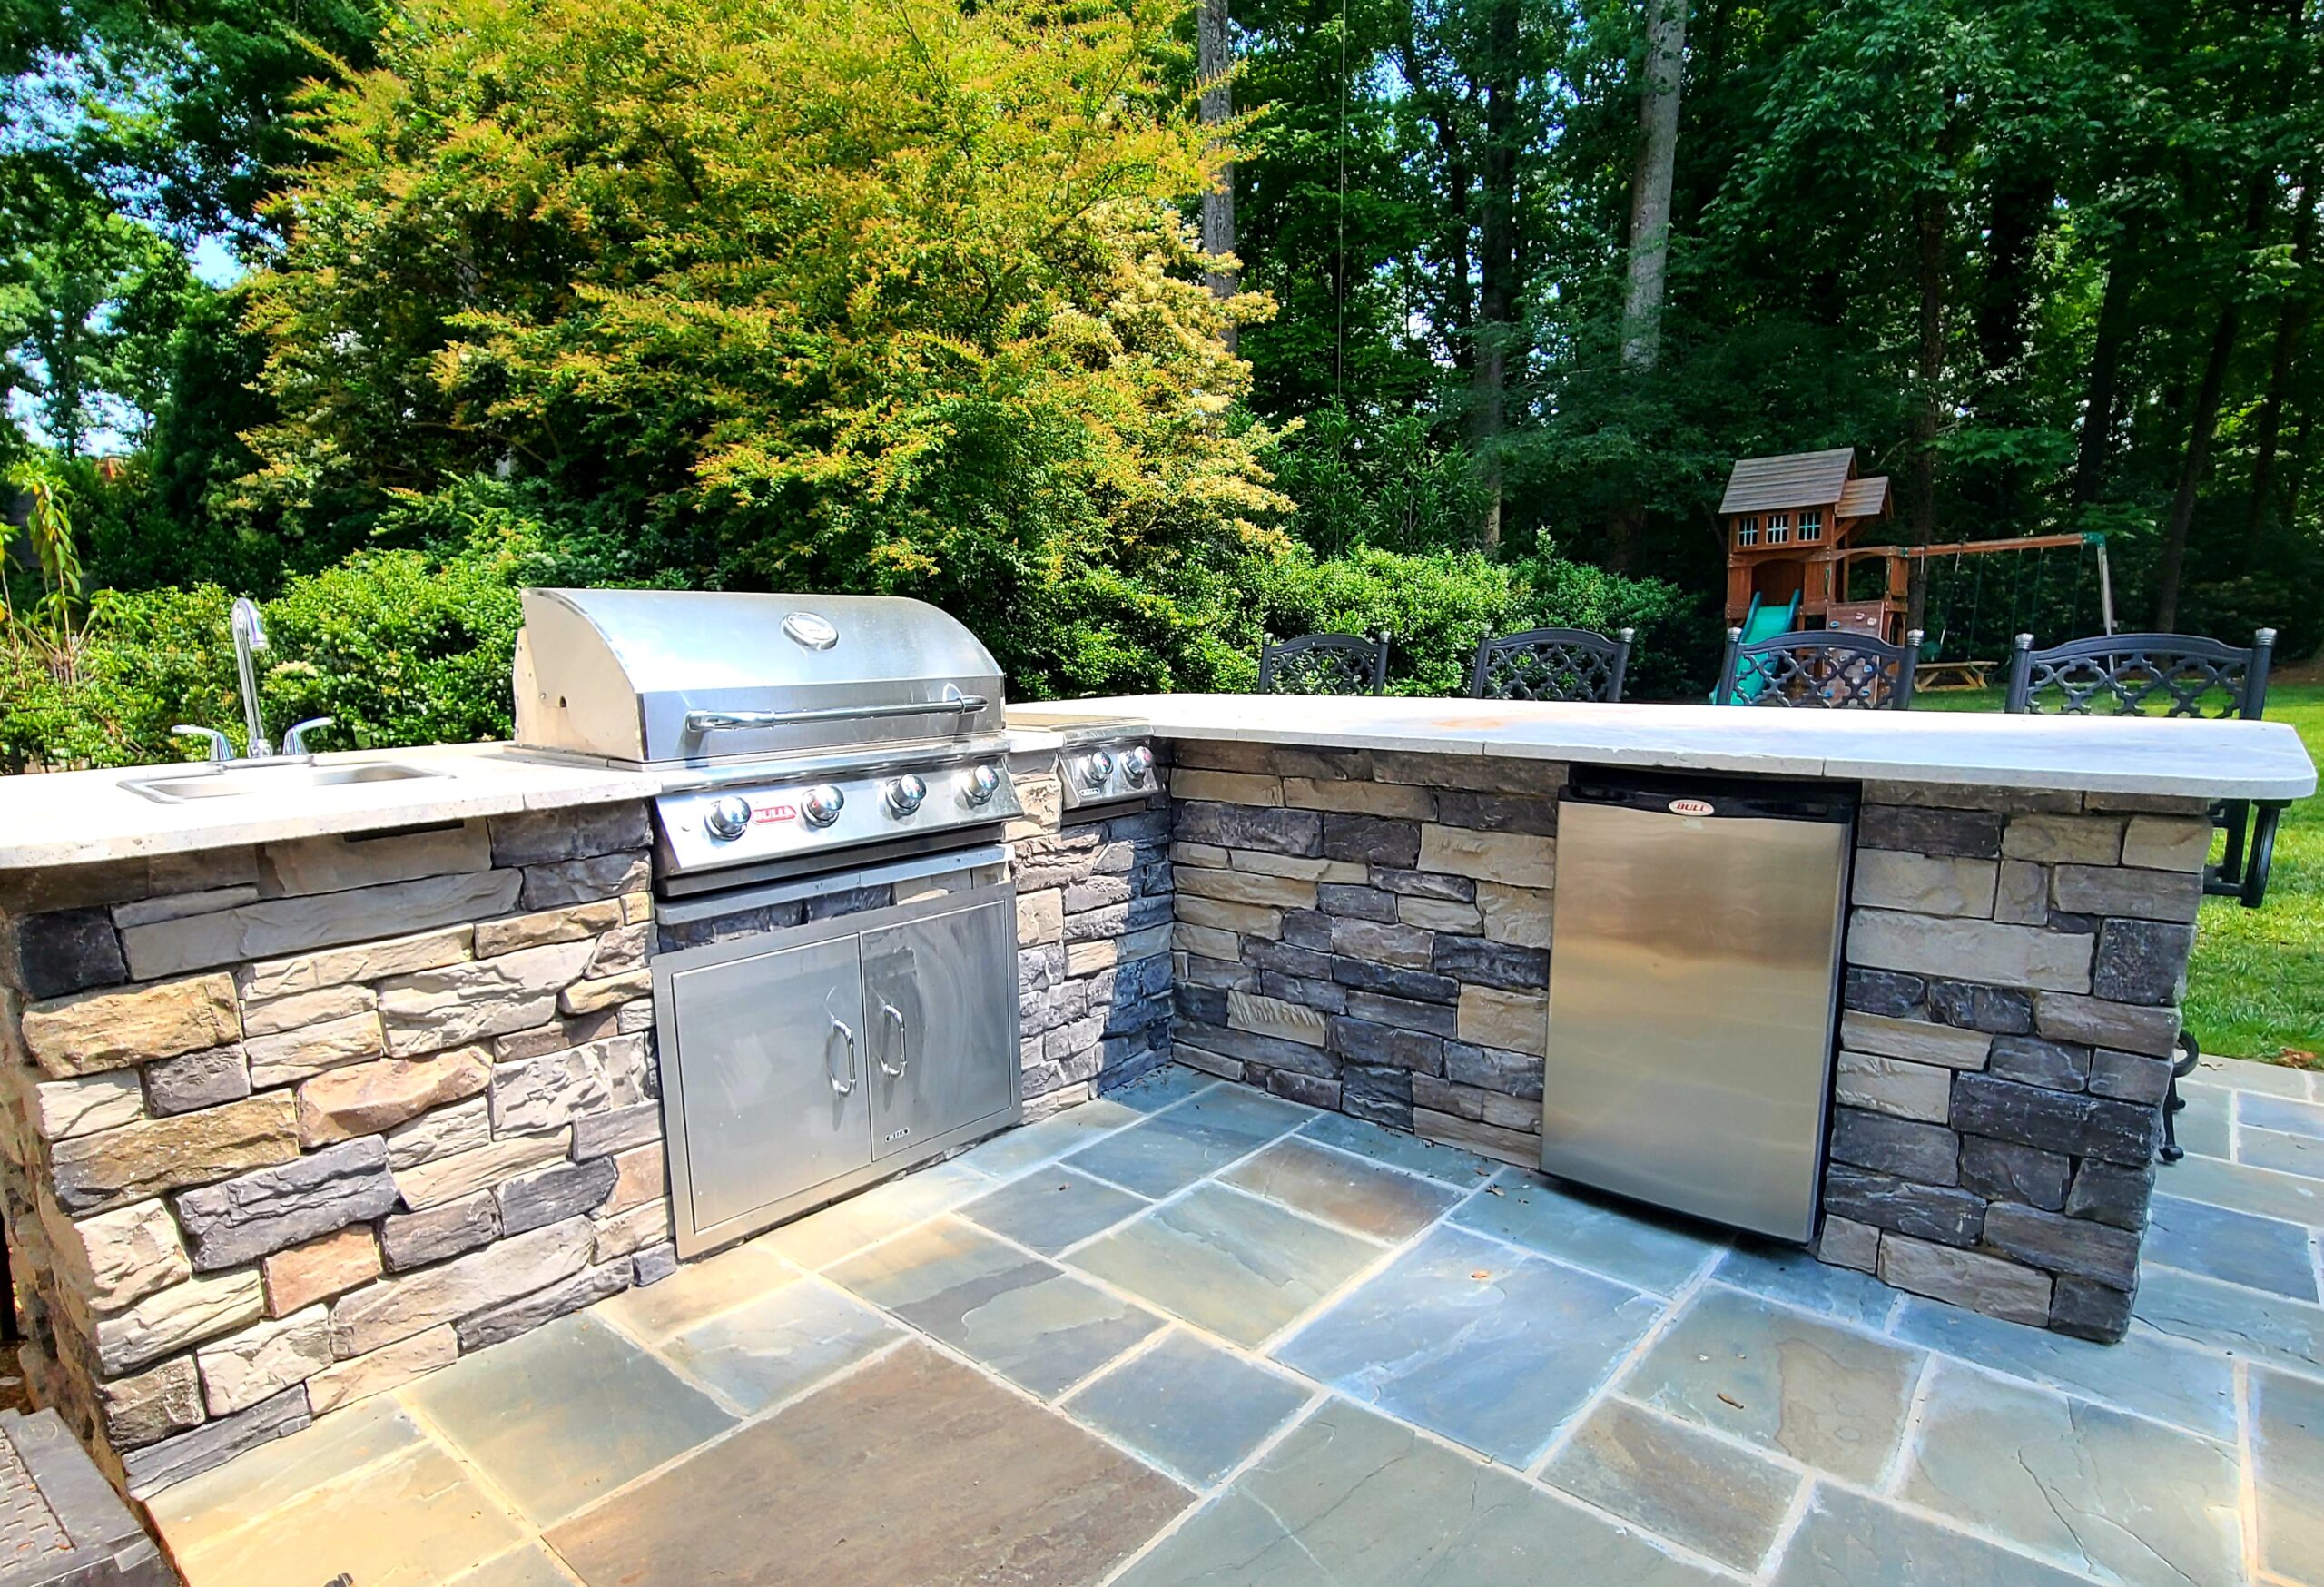 A metal outdoor kitchen with a little fridge, embeded in a stone deck. A lot materials blend in this photo.